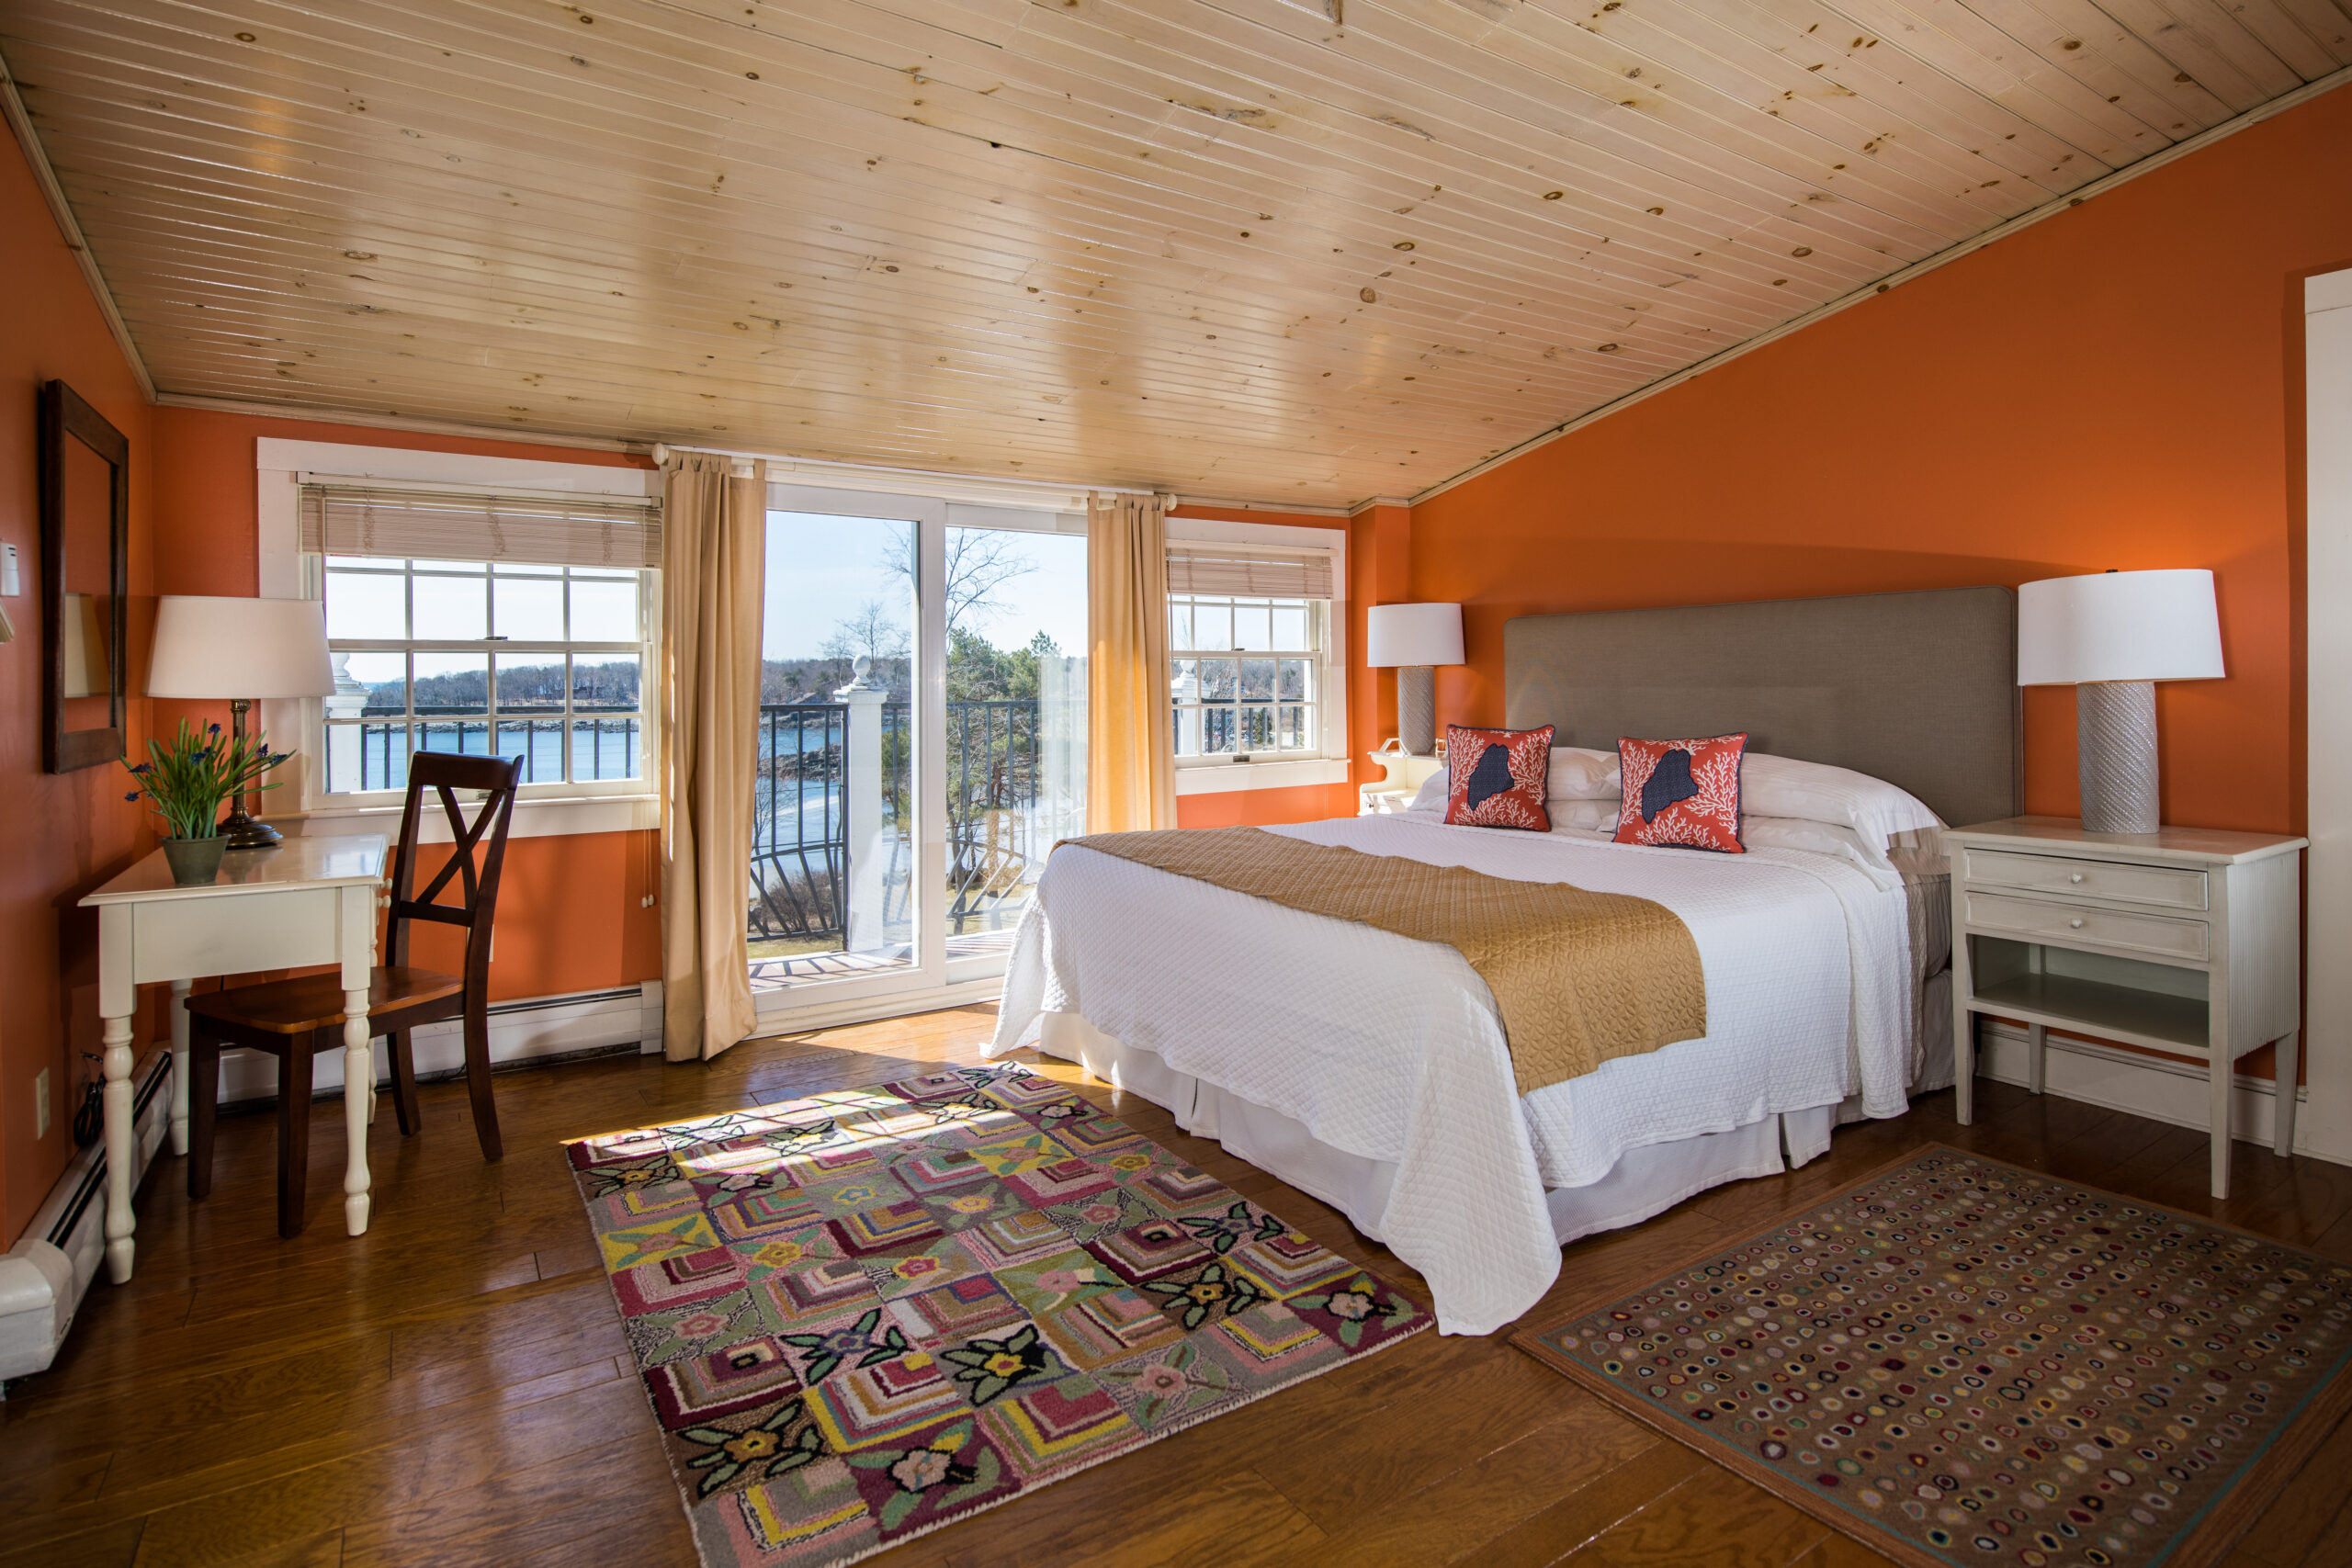 A coral bedroom with wooden floors, a pink, green, yelllow patterned rug, a desk, and king bed with a view through sliding doors of a balcony with ocean beyond.